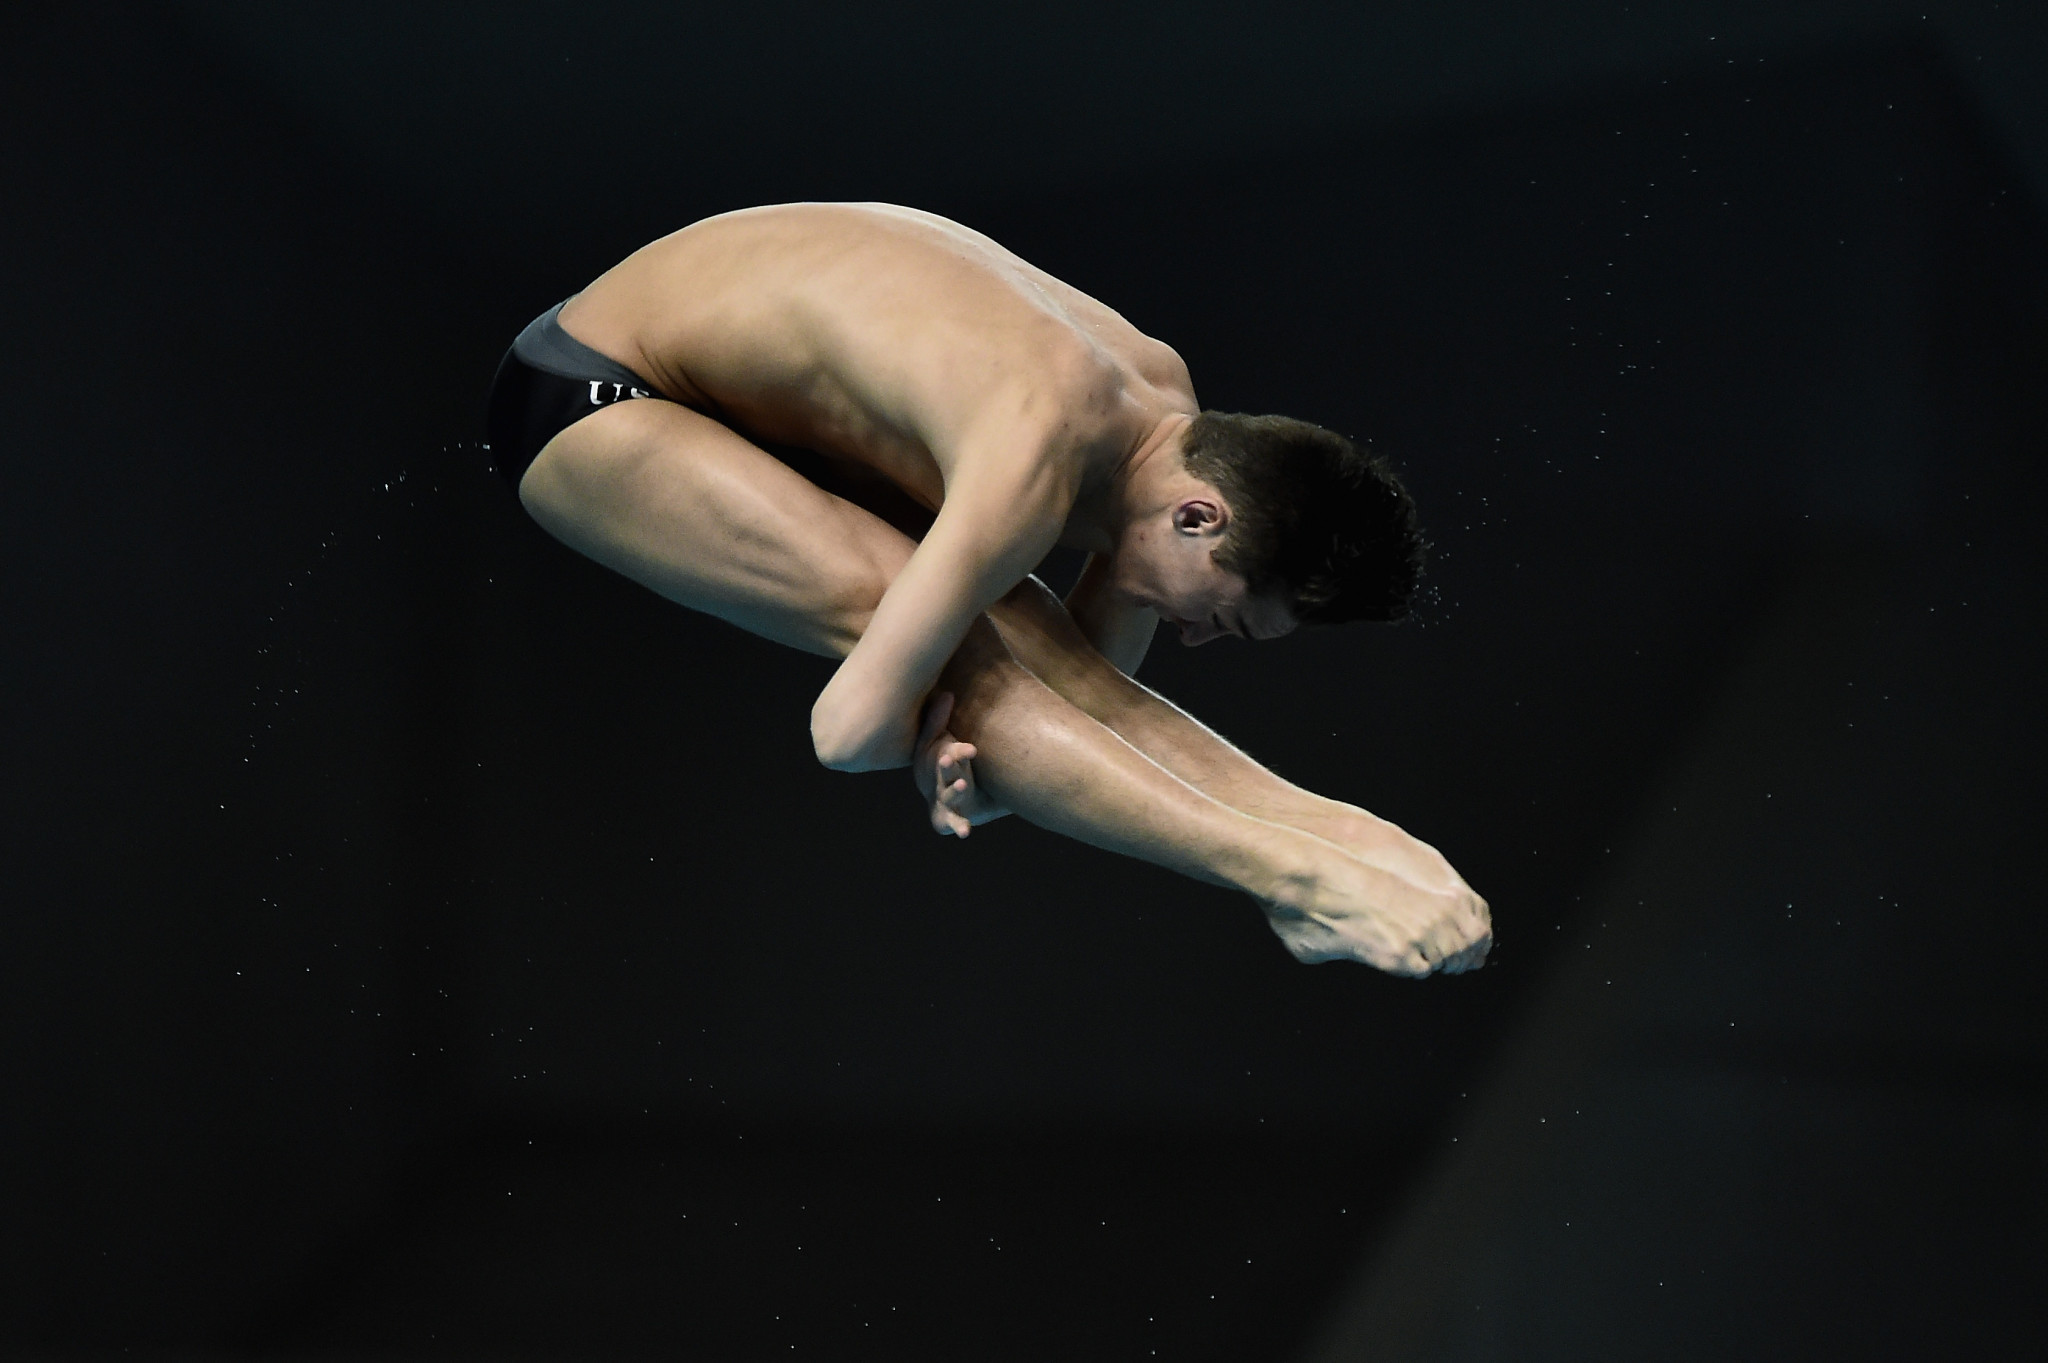 Steps could be taken to remove USA Diving's status as the official Olympic governing body for the sport ©Getty Images